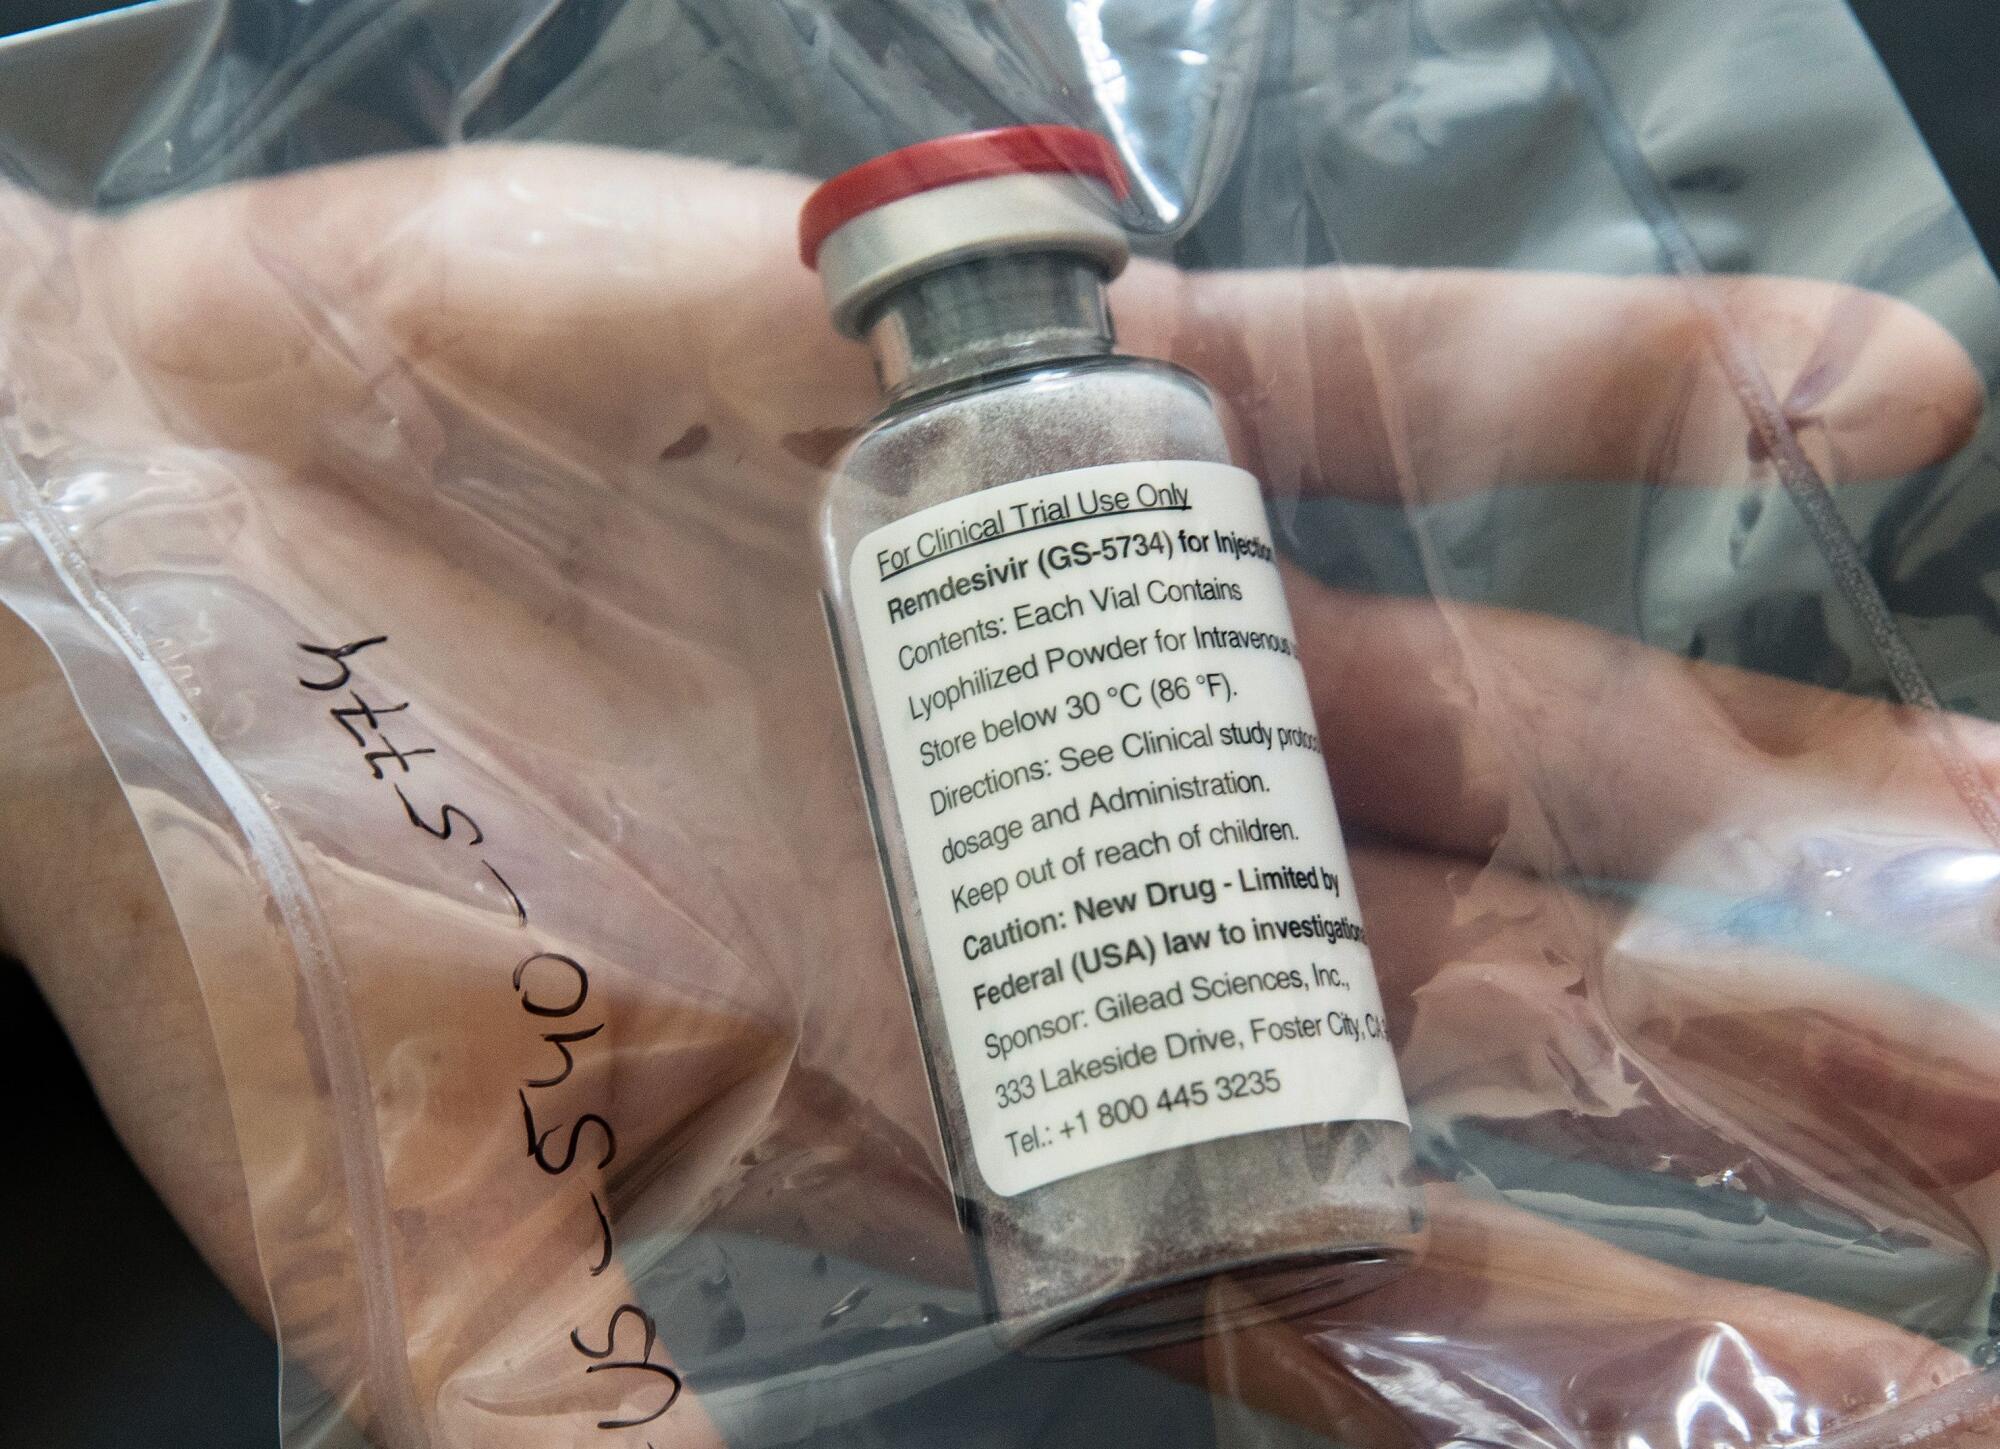 A vial of the drug remdesivir shown at a news conference.